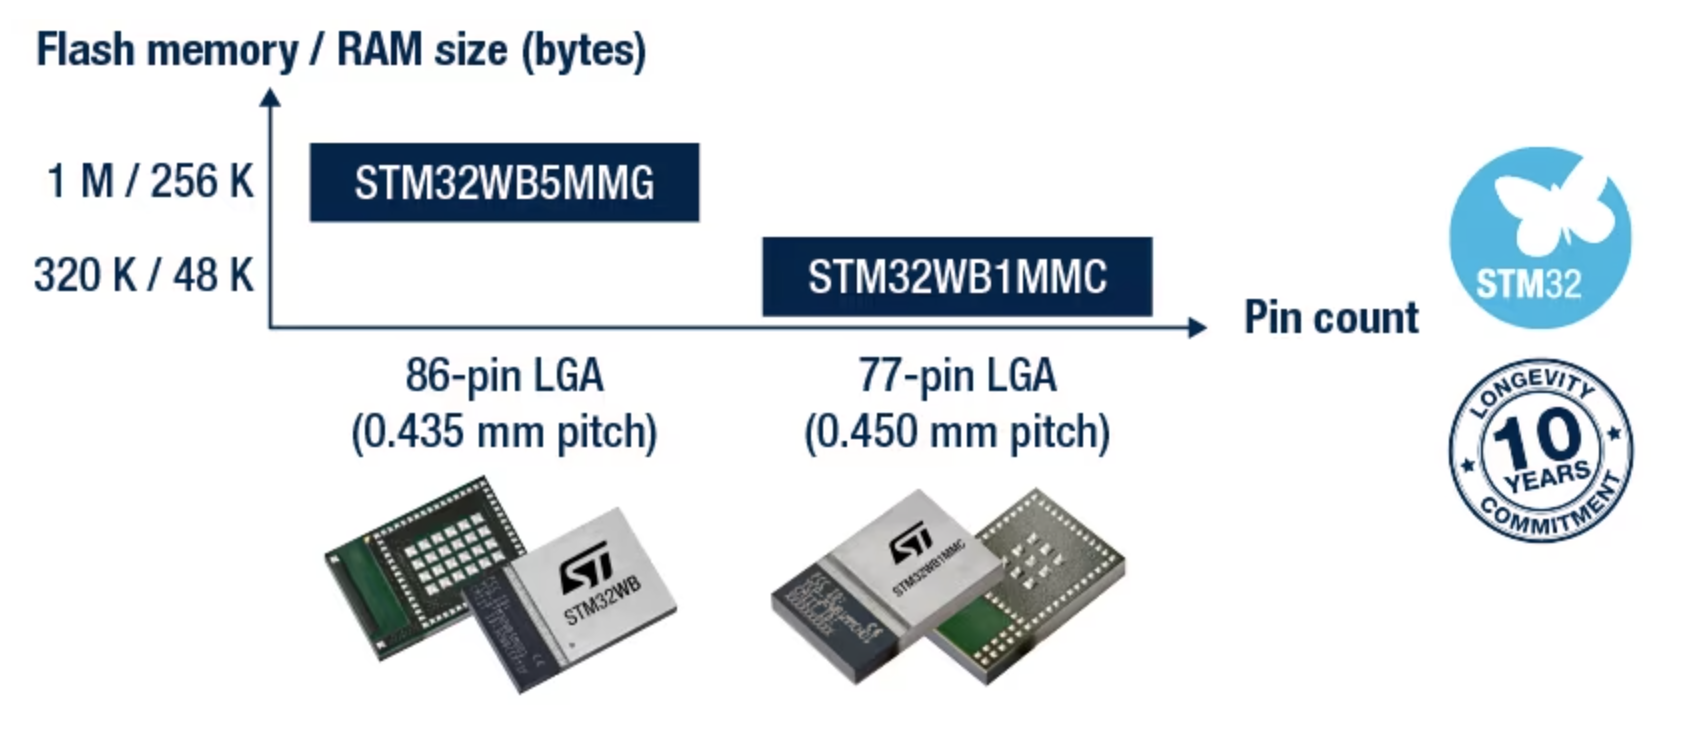 STMicroelectronics Simplifies and Accelerates Wireless Product Development with Certified STM32WB1MMC Bluetooth LE Module